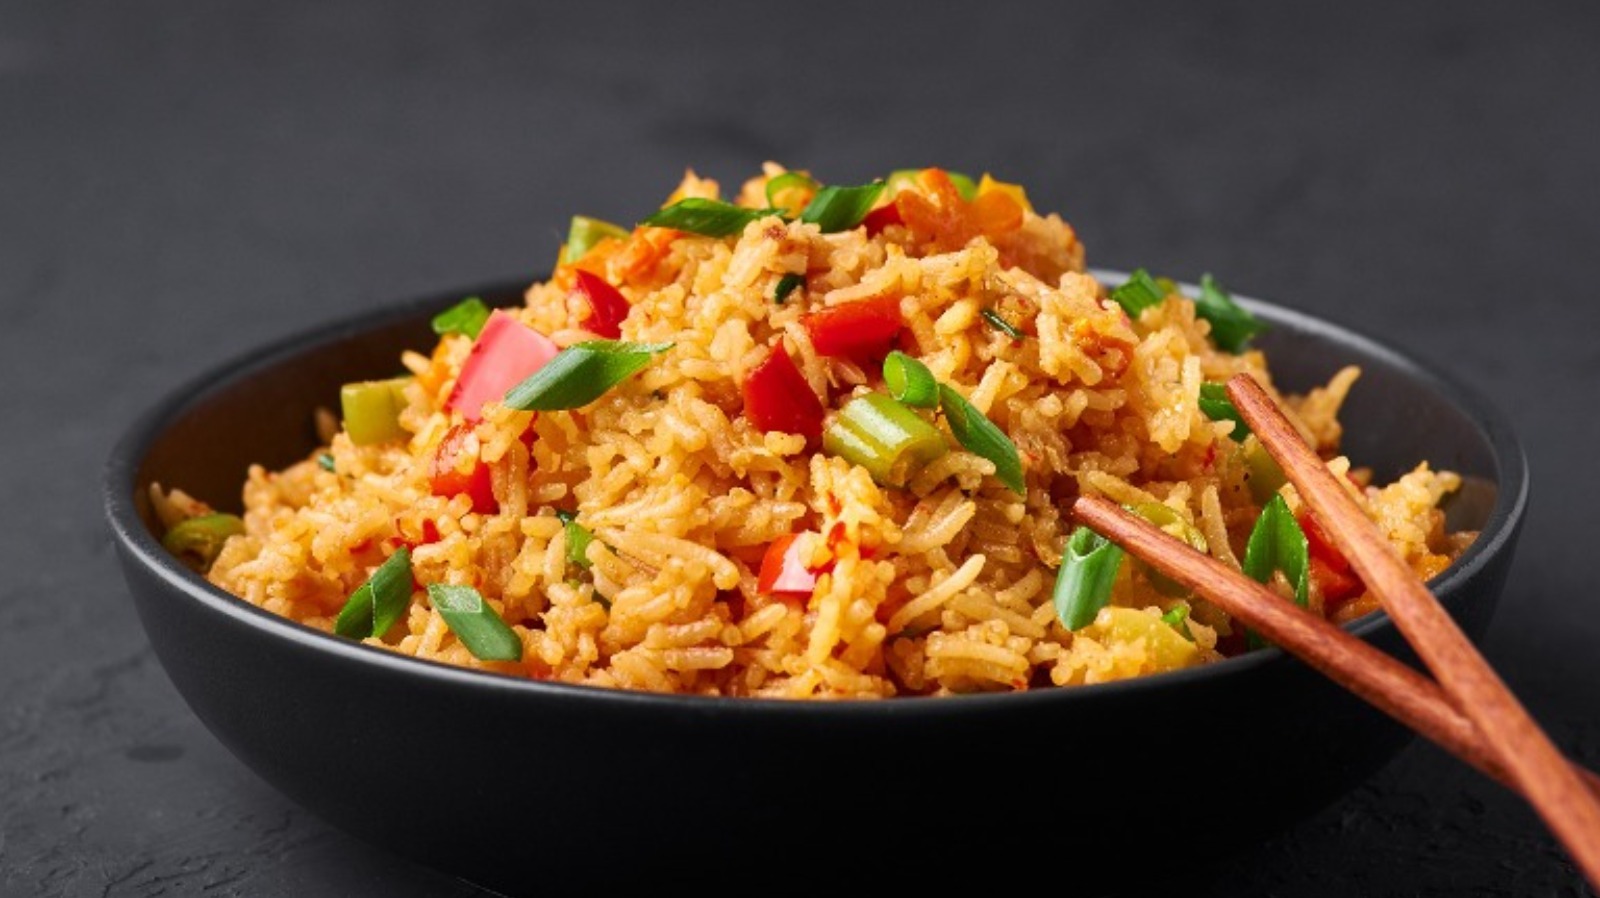 Trader Joe's Fans Are Excited For Its New ThanksgivingInspired Fried Rice